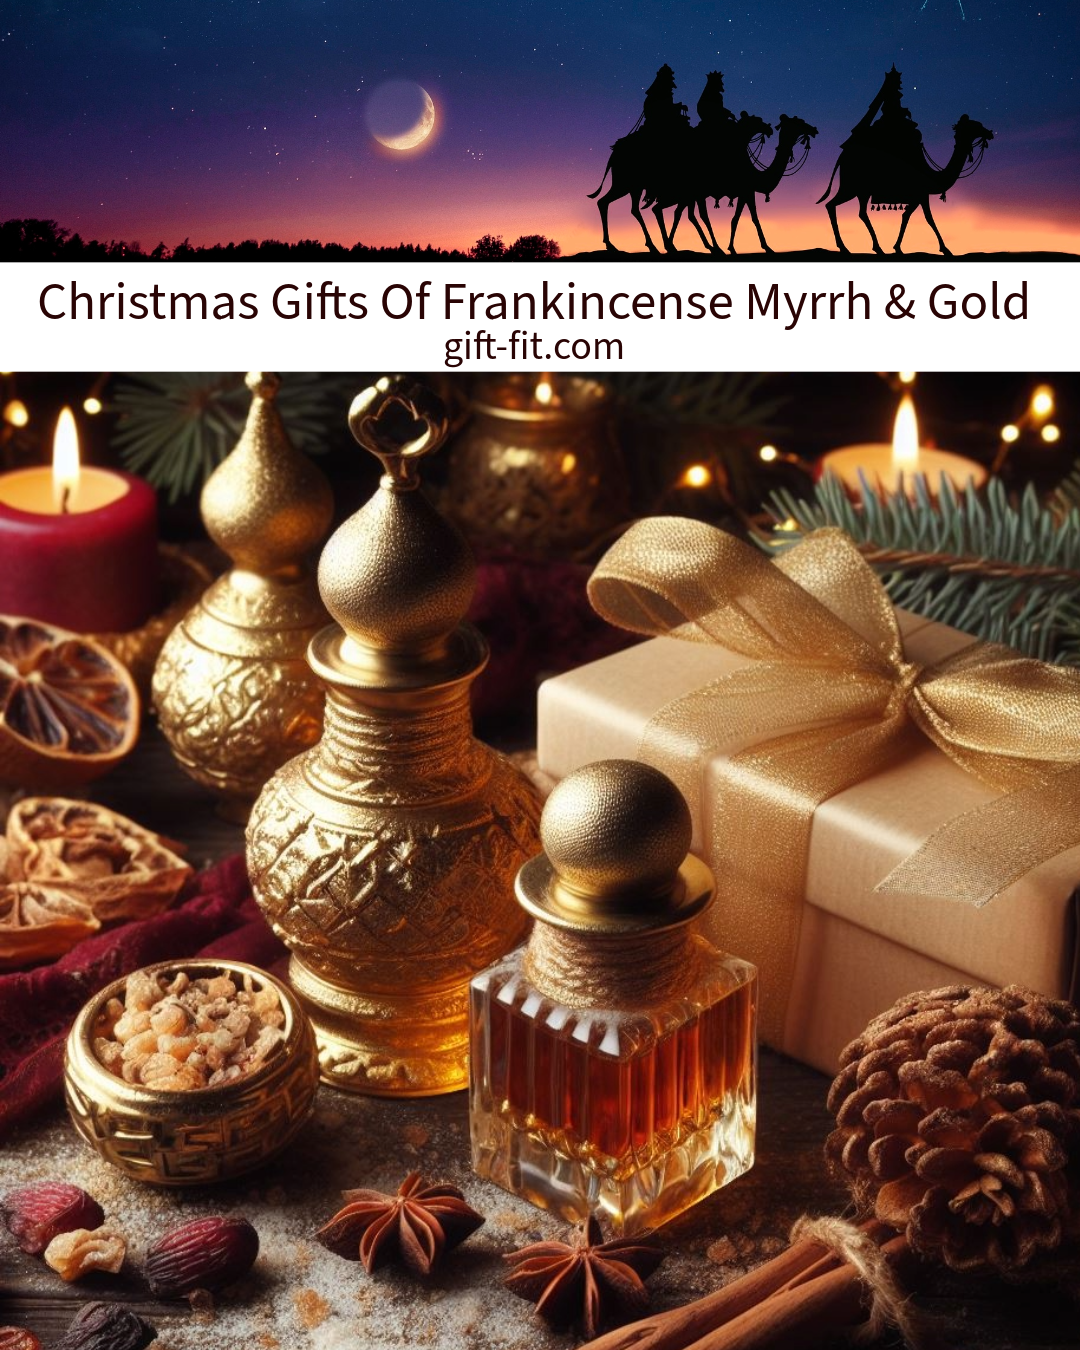 Christmas Gifts of Frankincense, Myrrh, and Gold: The Gifts of the Three Wise Men